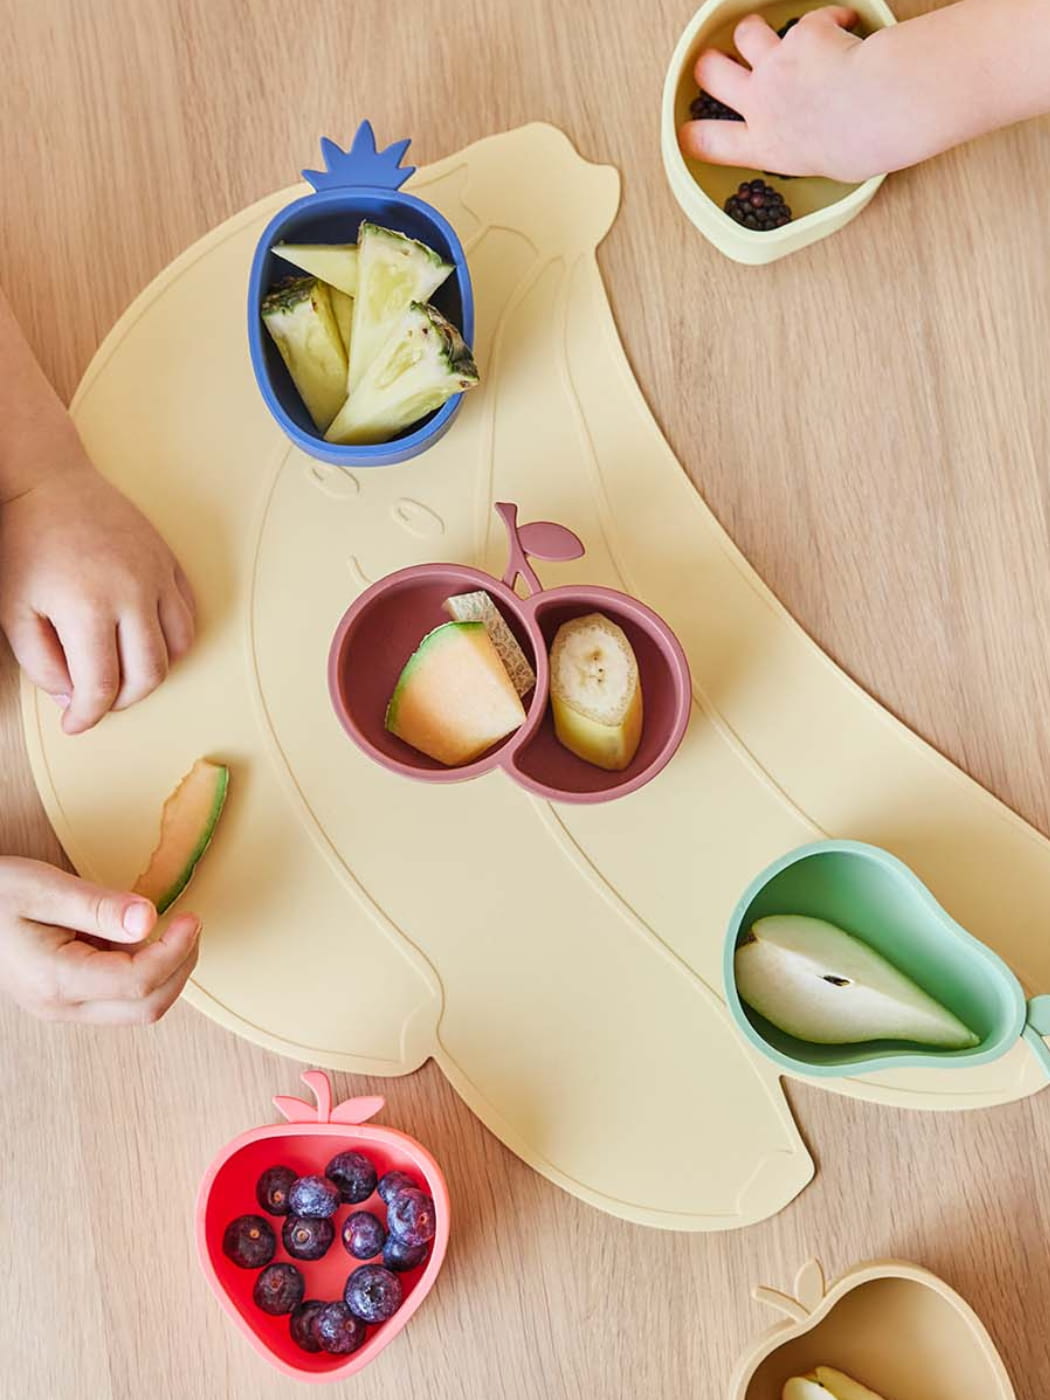 Silicone Placemat - Yummy Banana